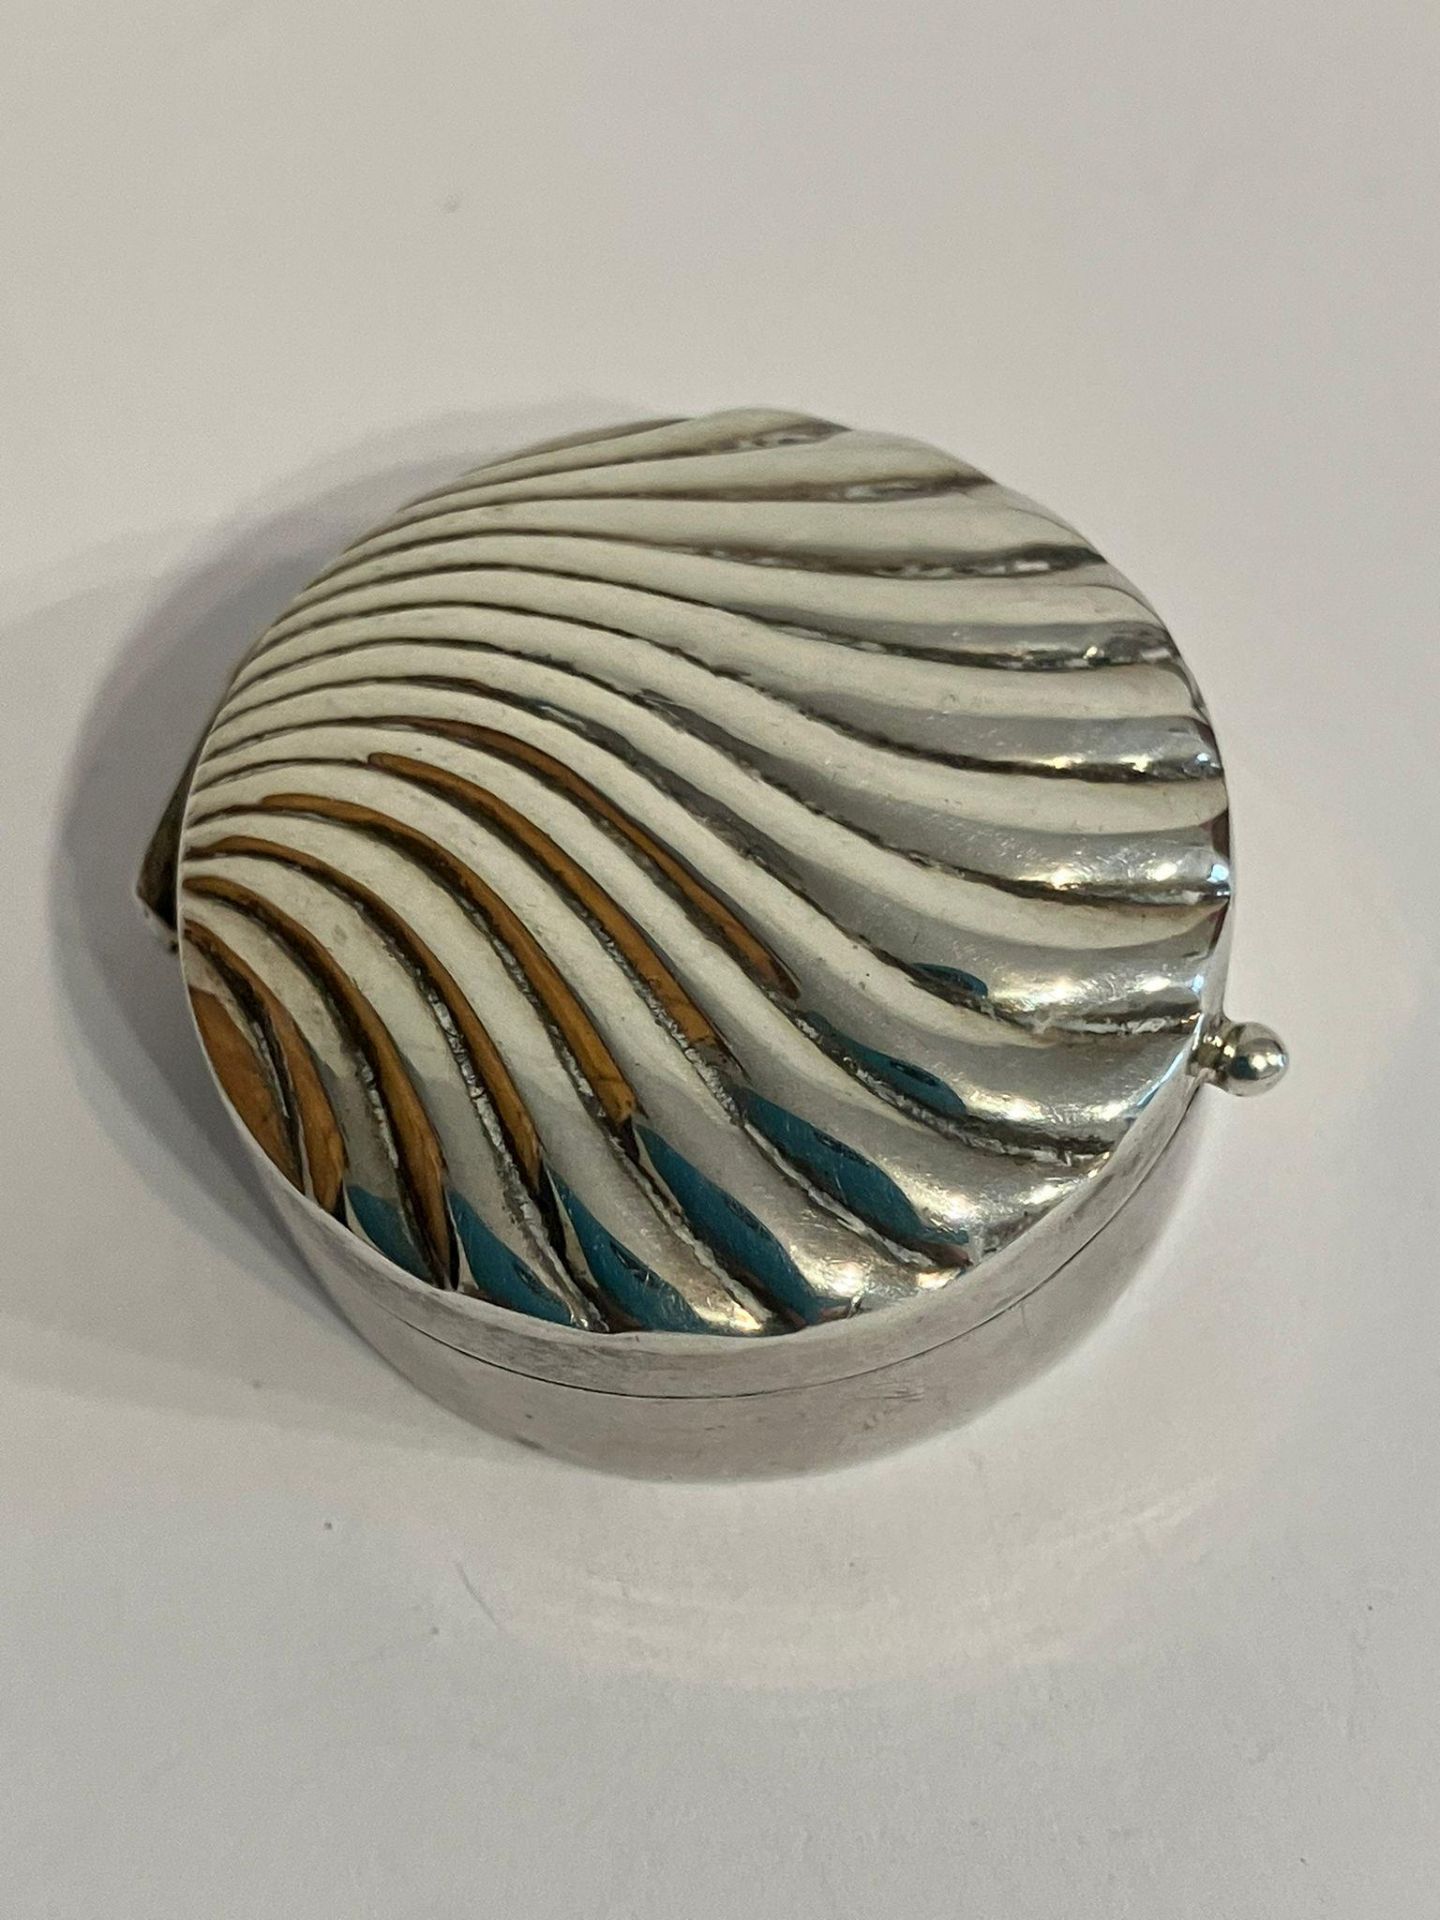 Vintage SILVER PILL BOX with Shell Design to lid. Full Hallmark to base. Excellent condition.